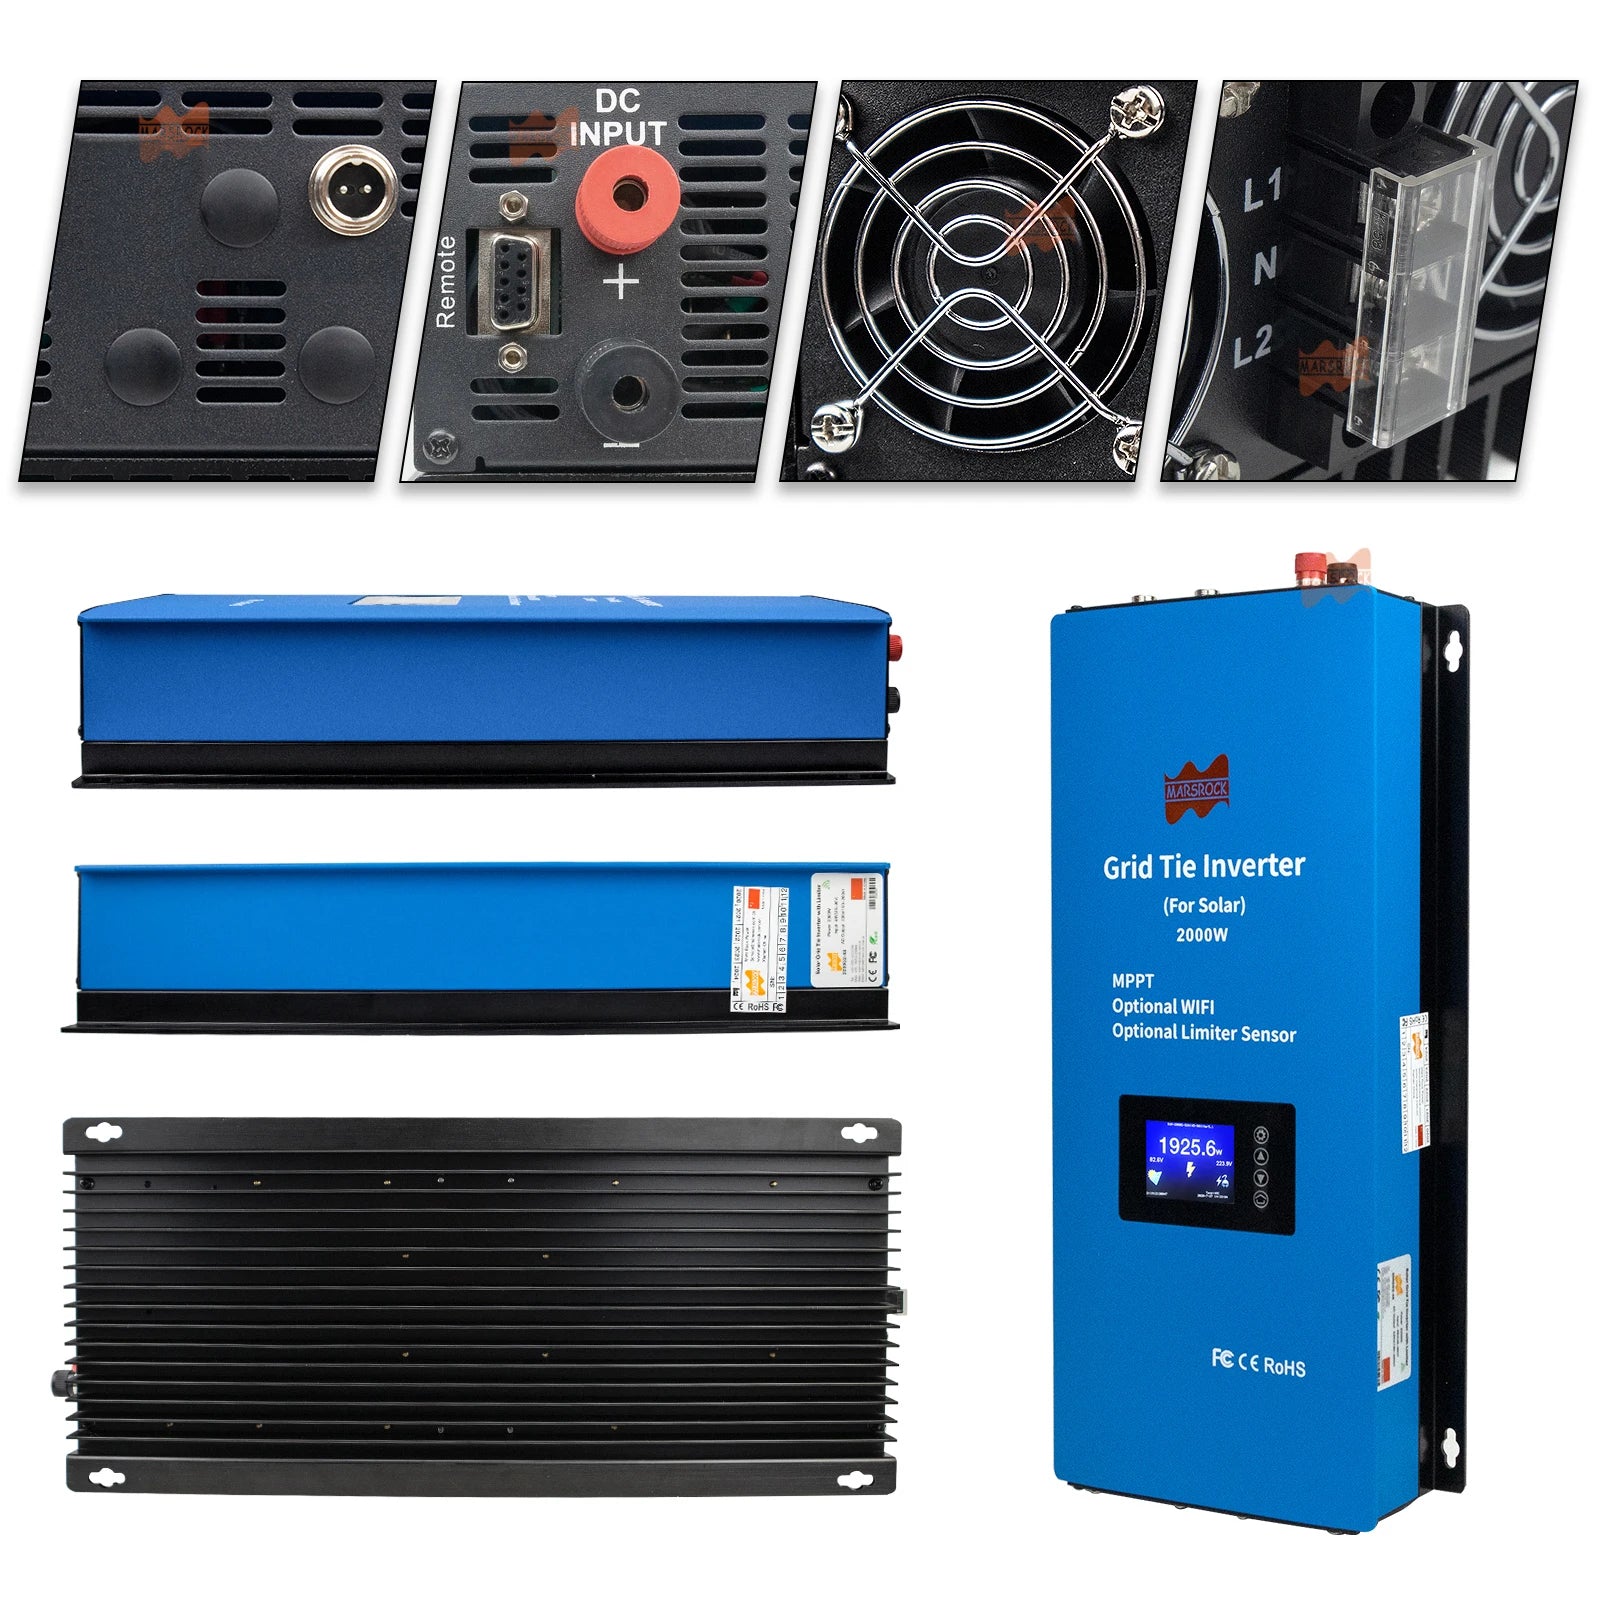 1000W 2000W Solar Inverter, Grid-tie inverter for solar panels with MPPT tech, WiFi option, and sensor, ROHS compliant.